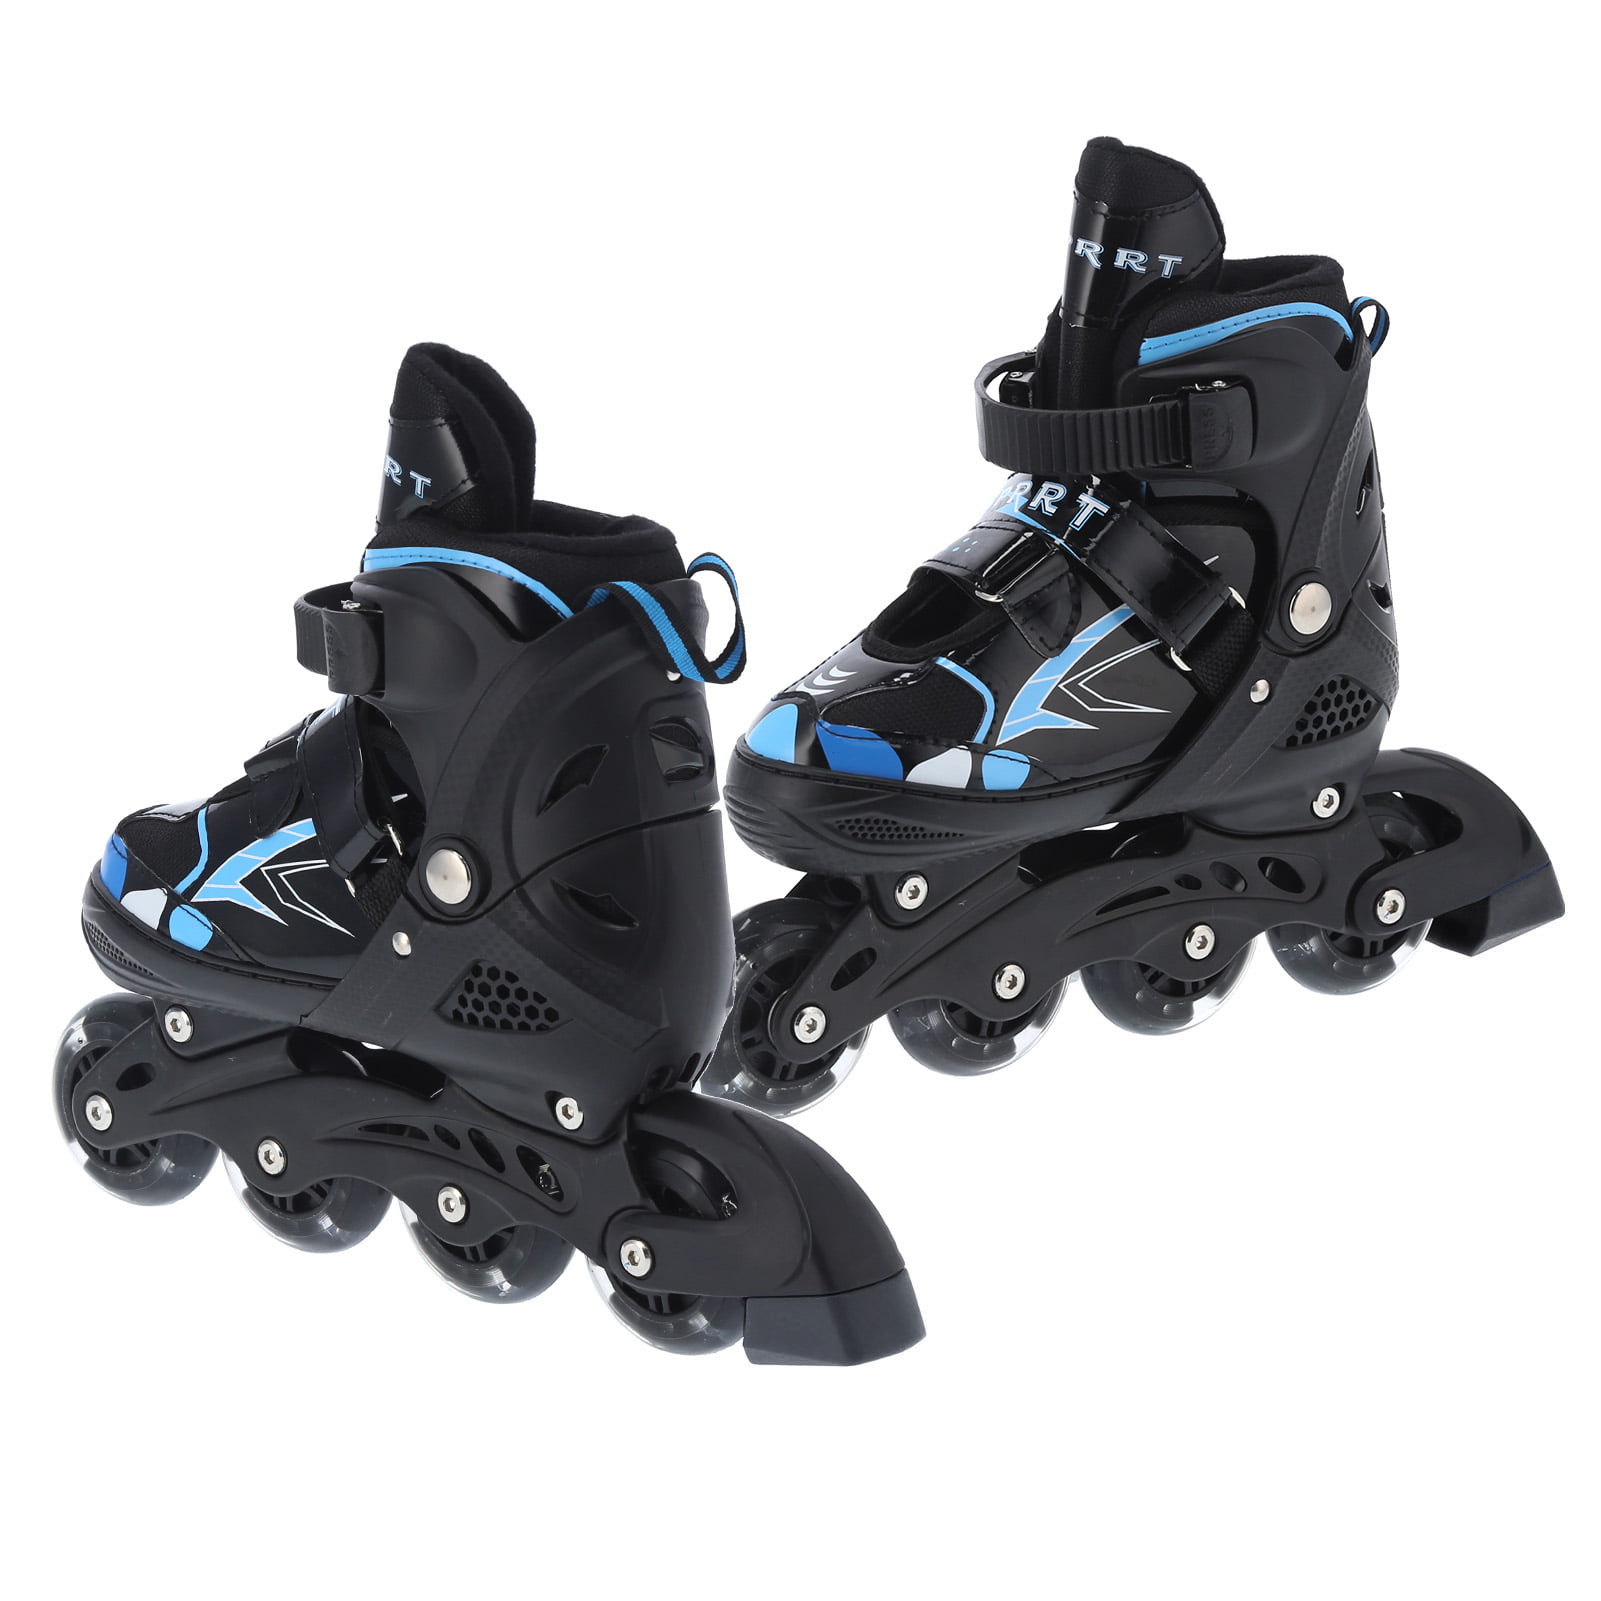 Outdoor Roller Blades Roller Skates for Girls and Boys Miageek Adjustable Inline Skates with Light Up LED Wheels Men and Women 